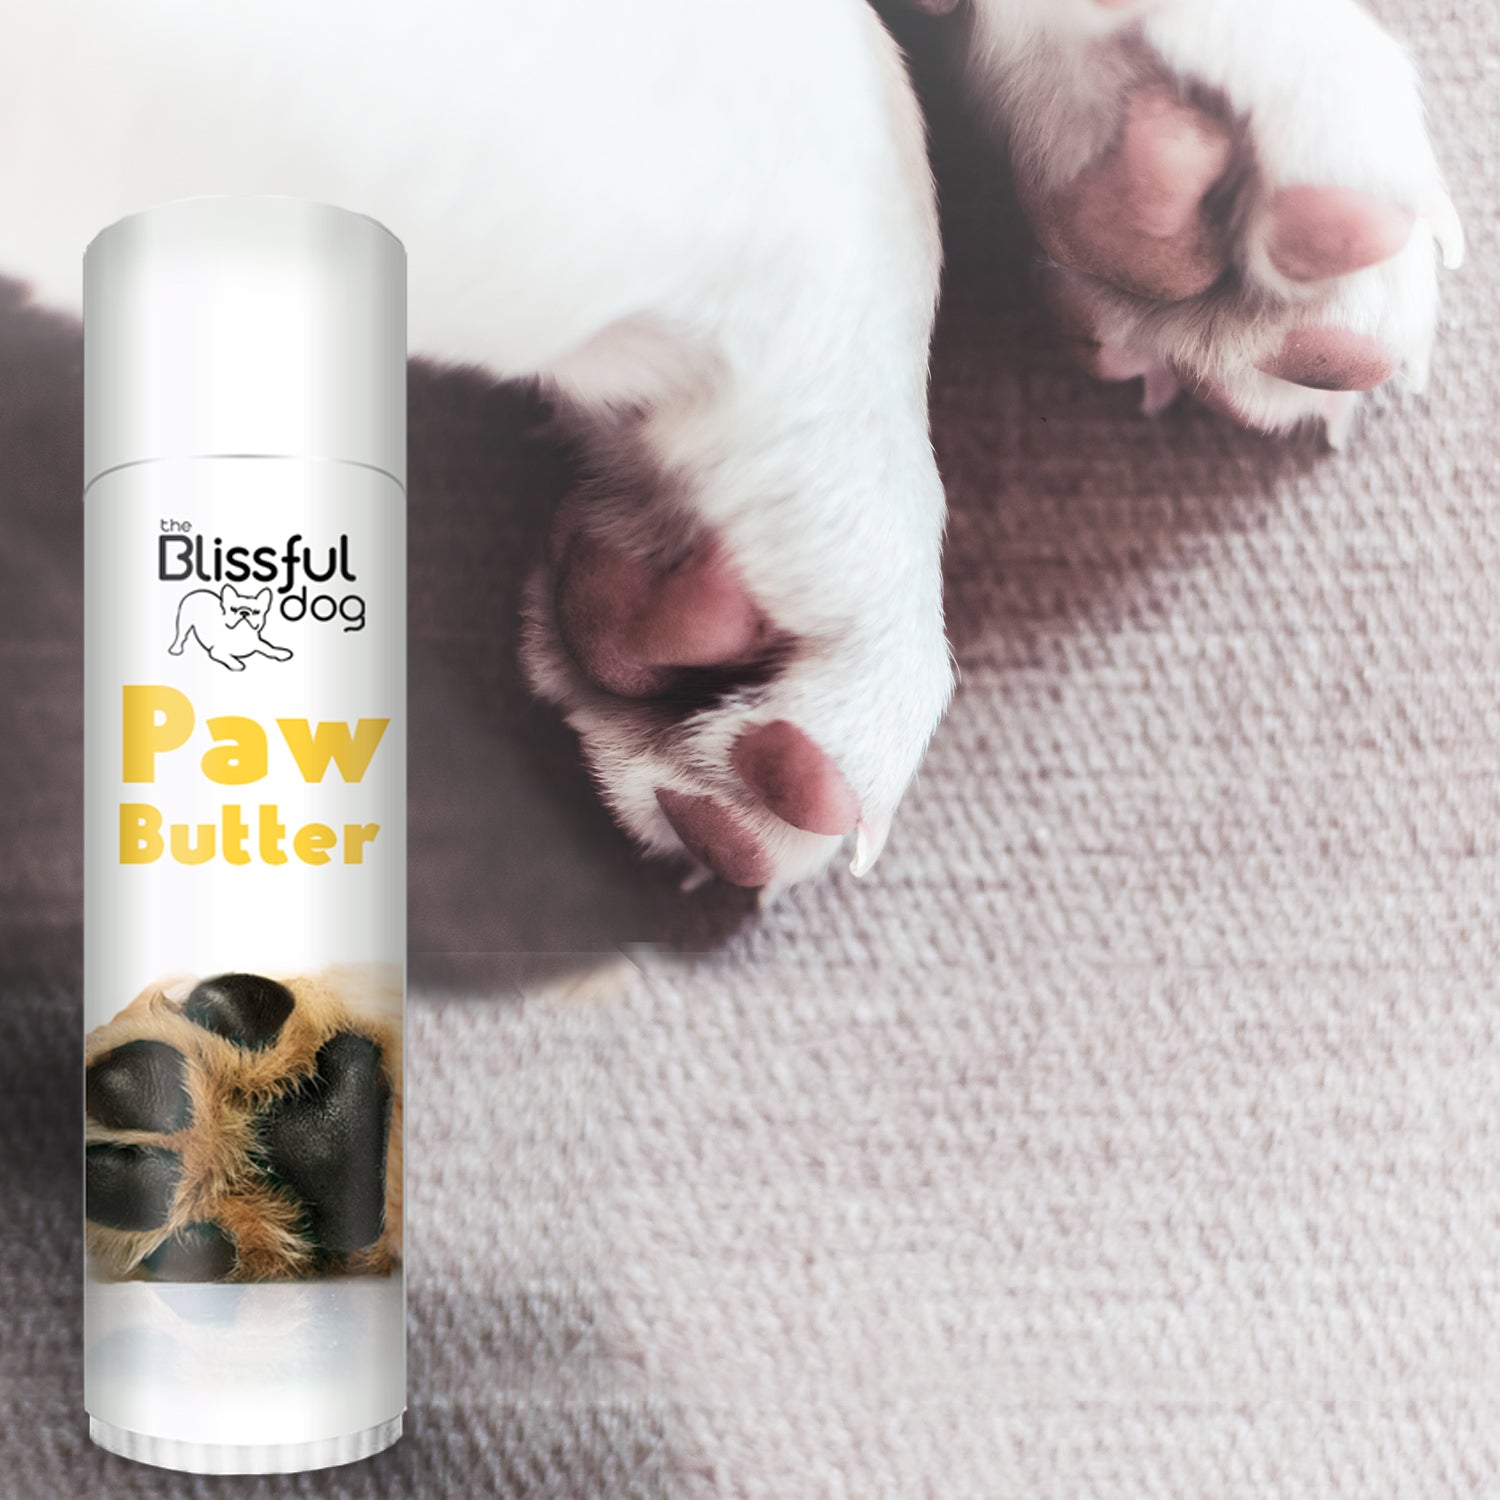 Paw Butter for Rough, Dry Dog Paws